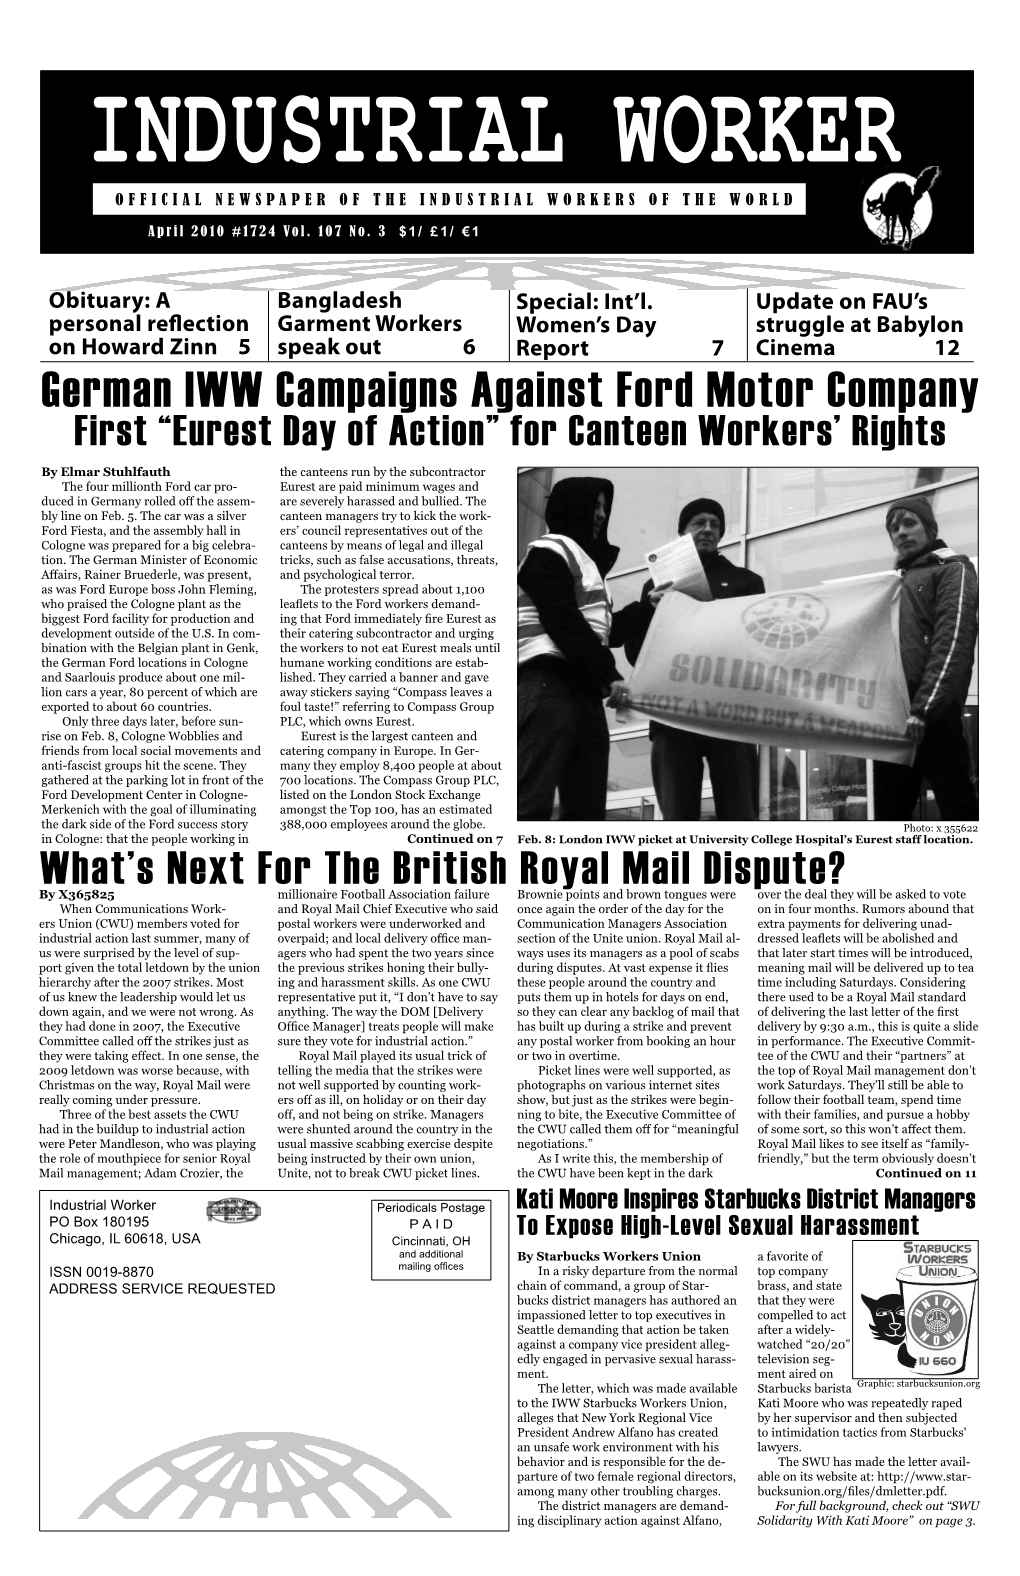 German IWW Campaigns Against Ford Motor Company